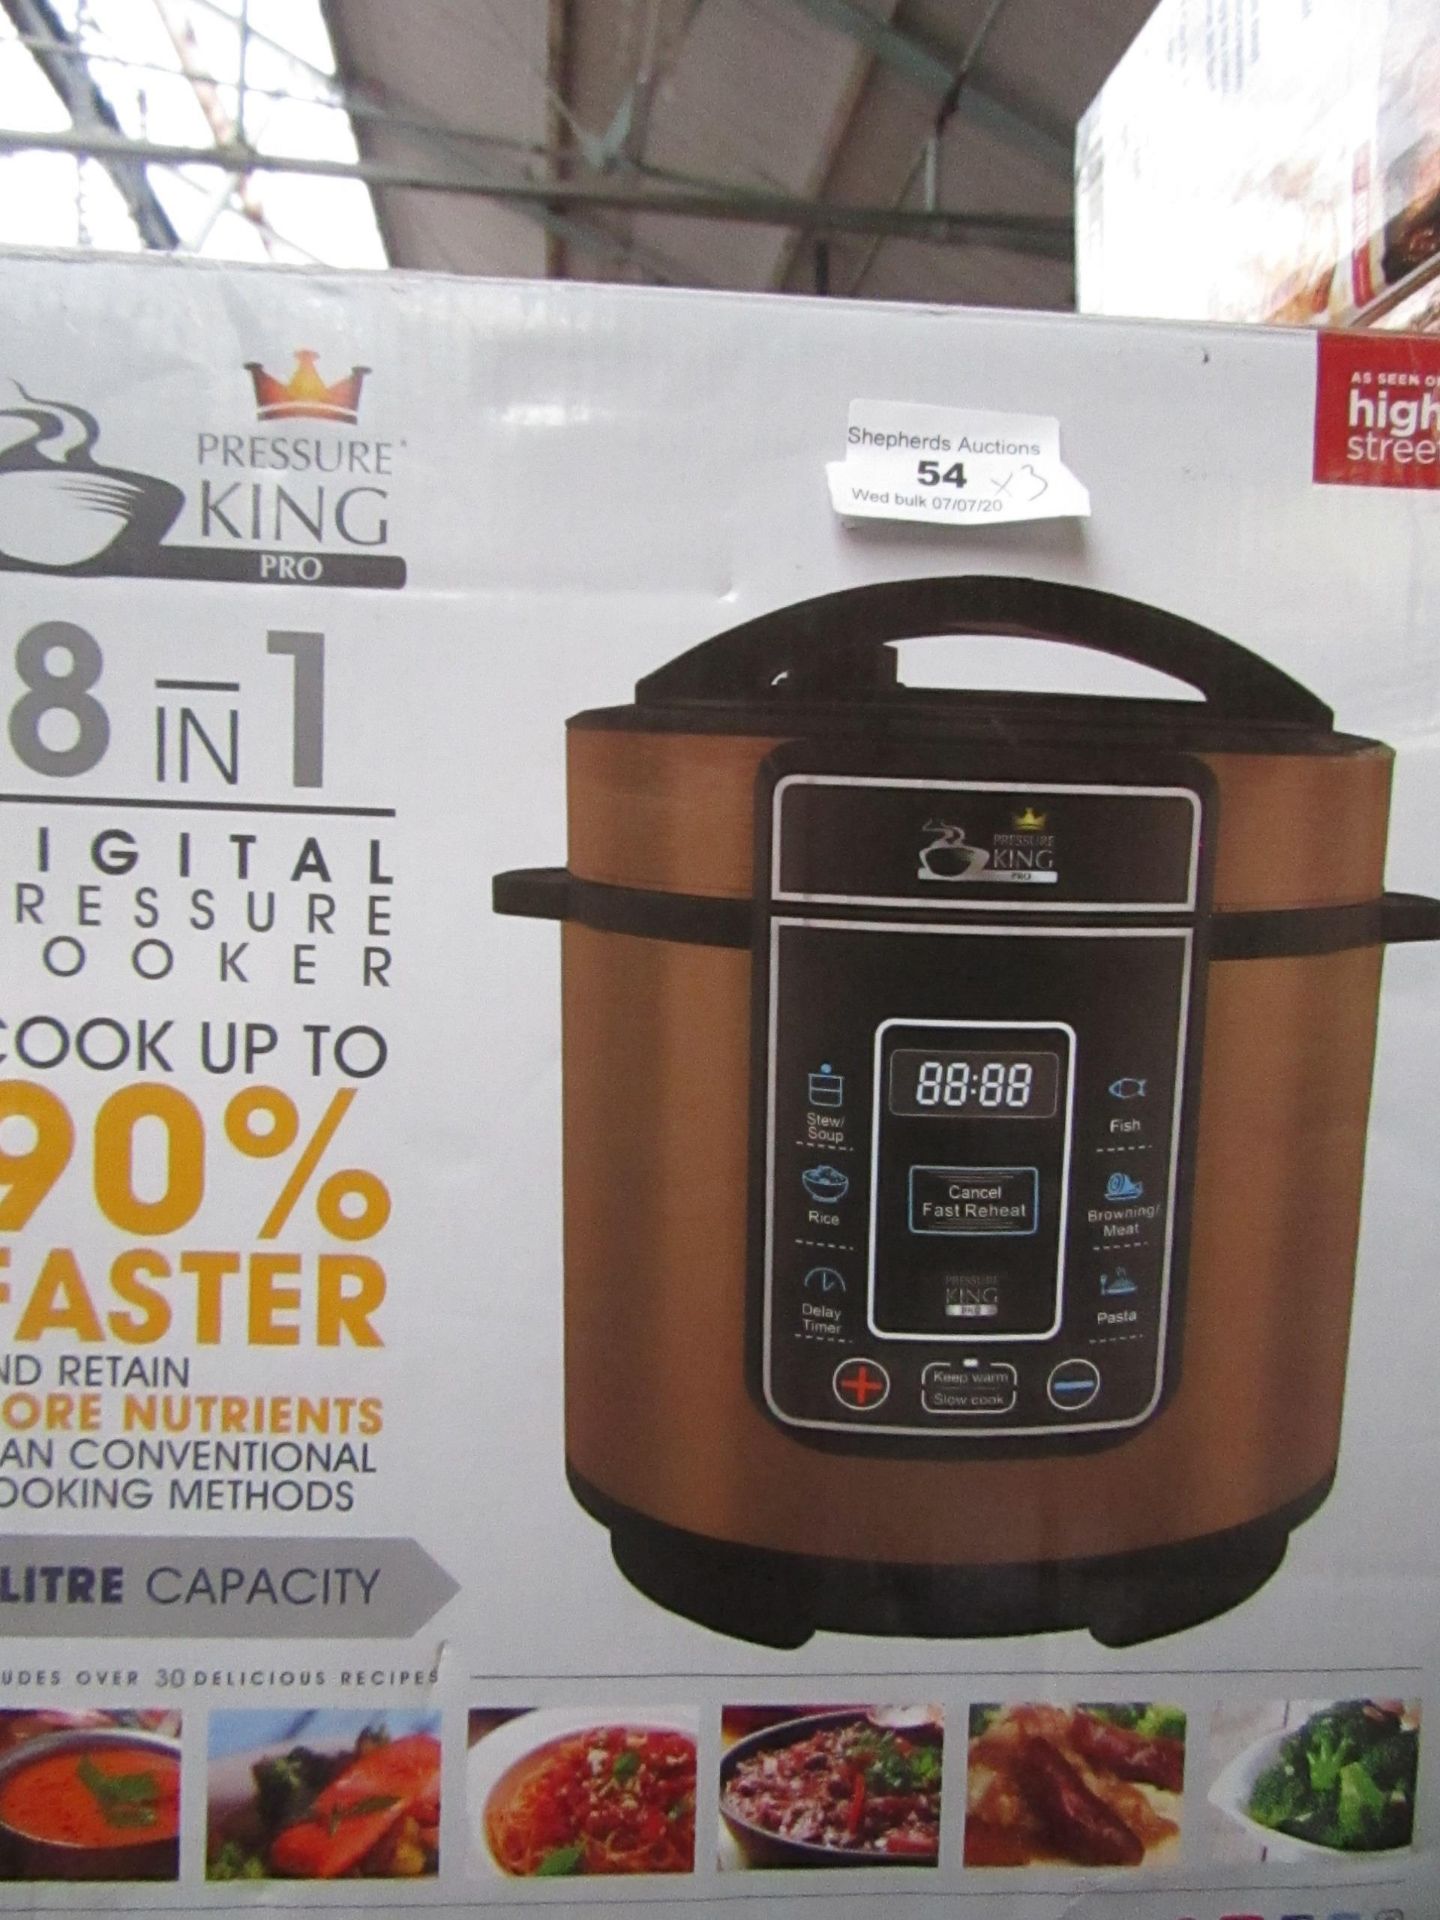 | 3X | PRESSURE KING PRO 8 IN 1 DIGITAL PRESSURE AND MULTI COOKER | UNCHECKED AND BOXED | NO